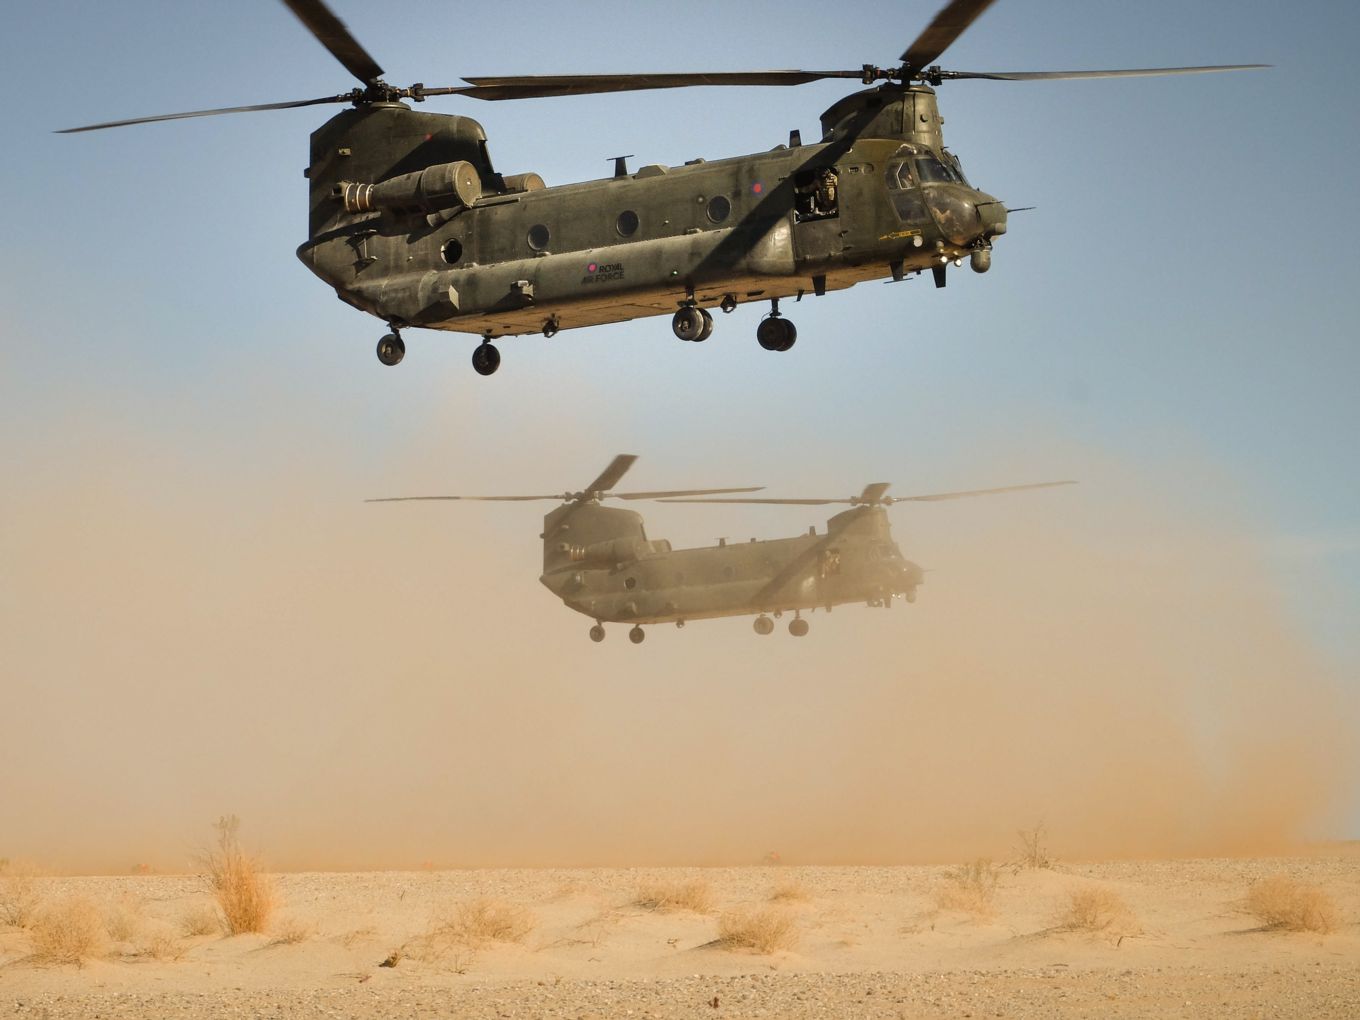 Two Chinooks flying low in Mali.